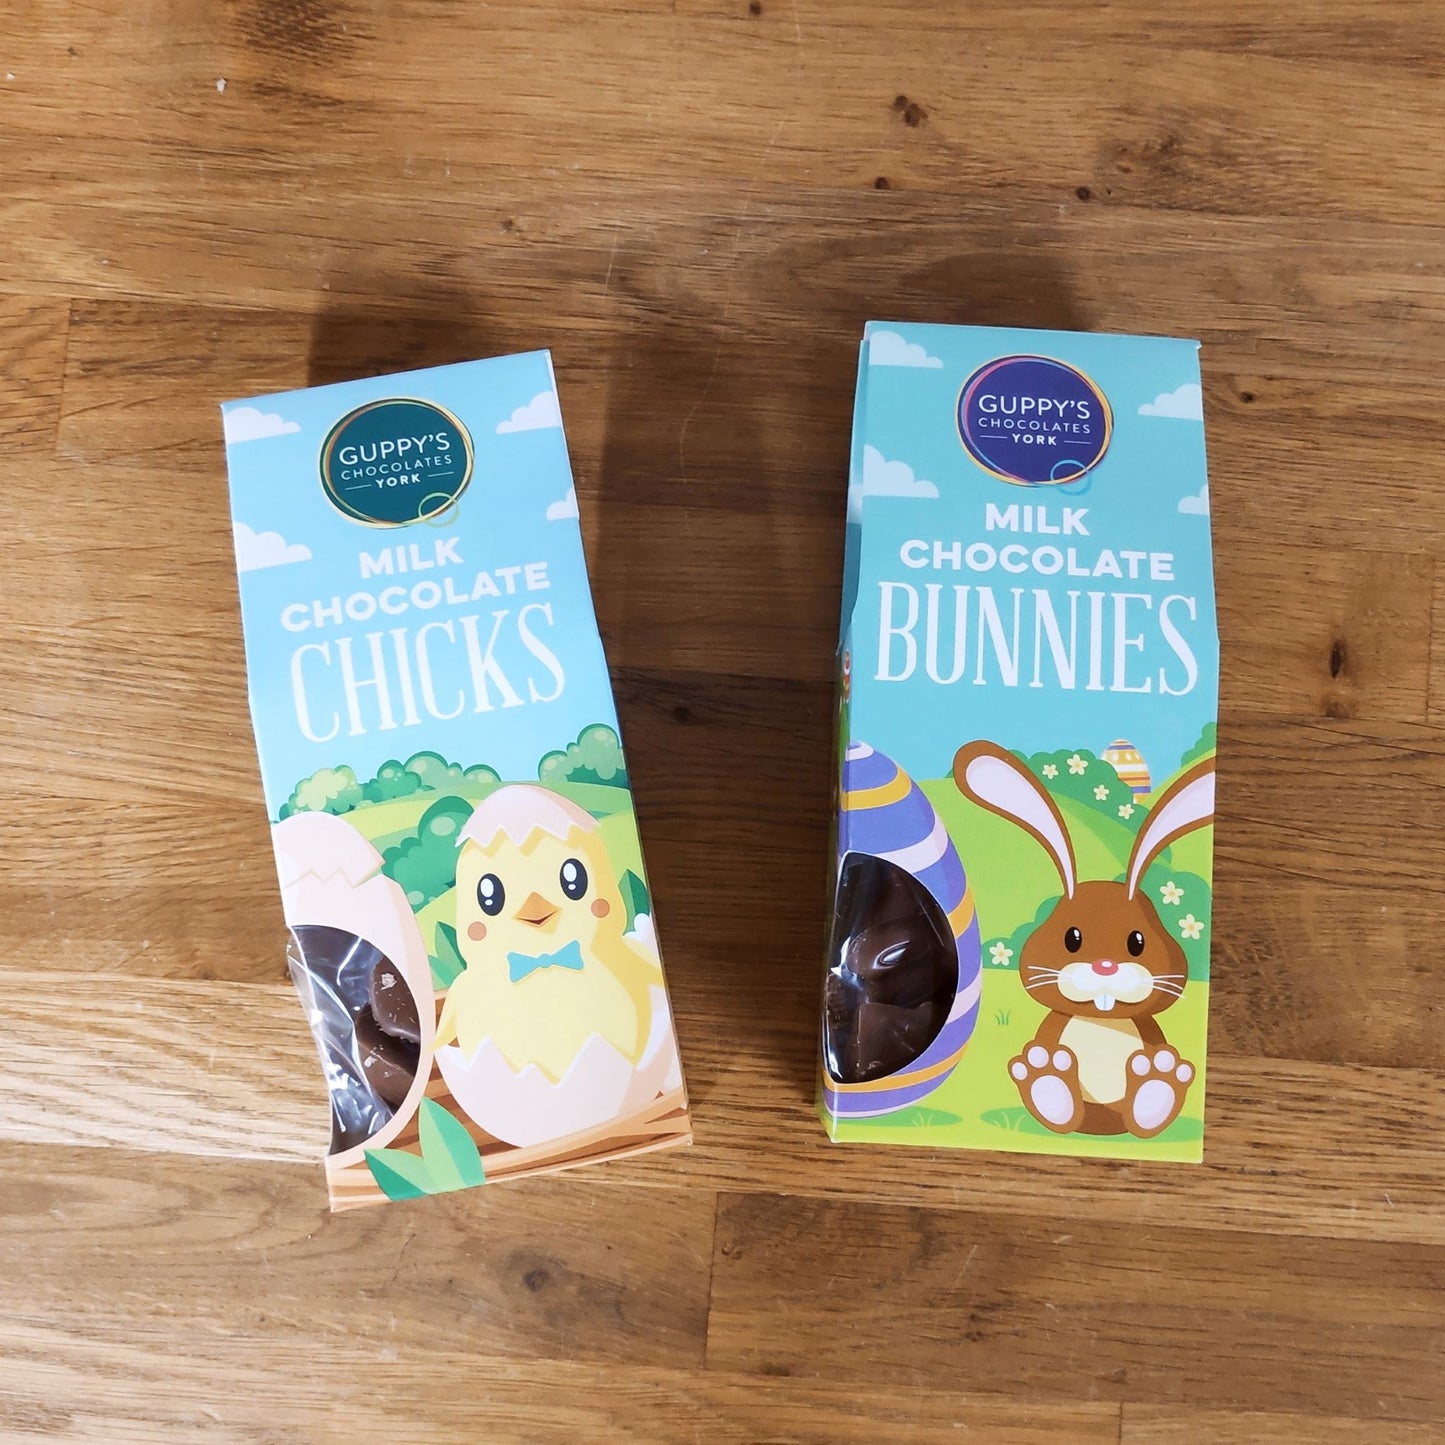 Milk Chocolate Bunny and Chick Shapes